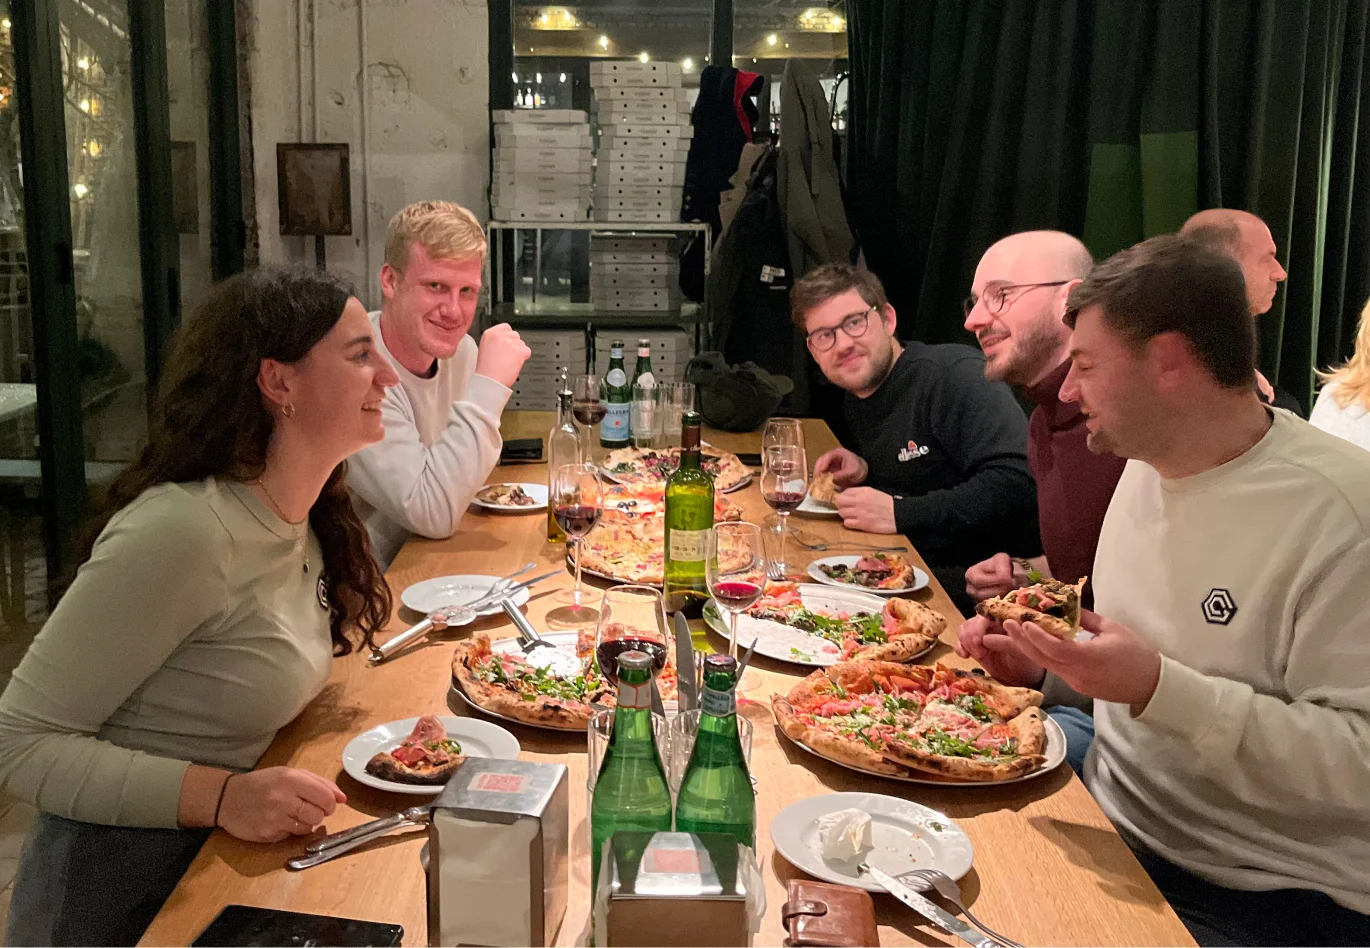 Five colleagues eating pizza at the table, having fun